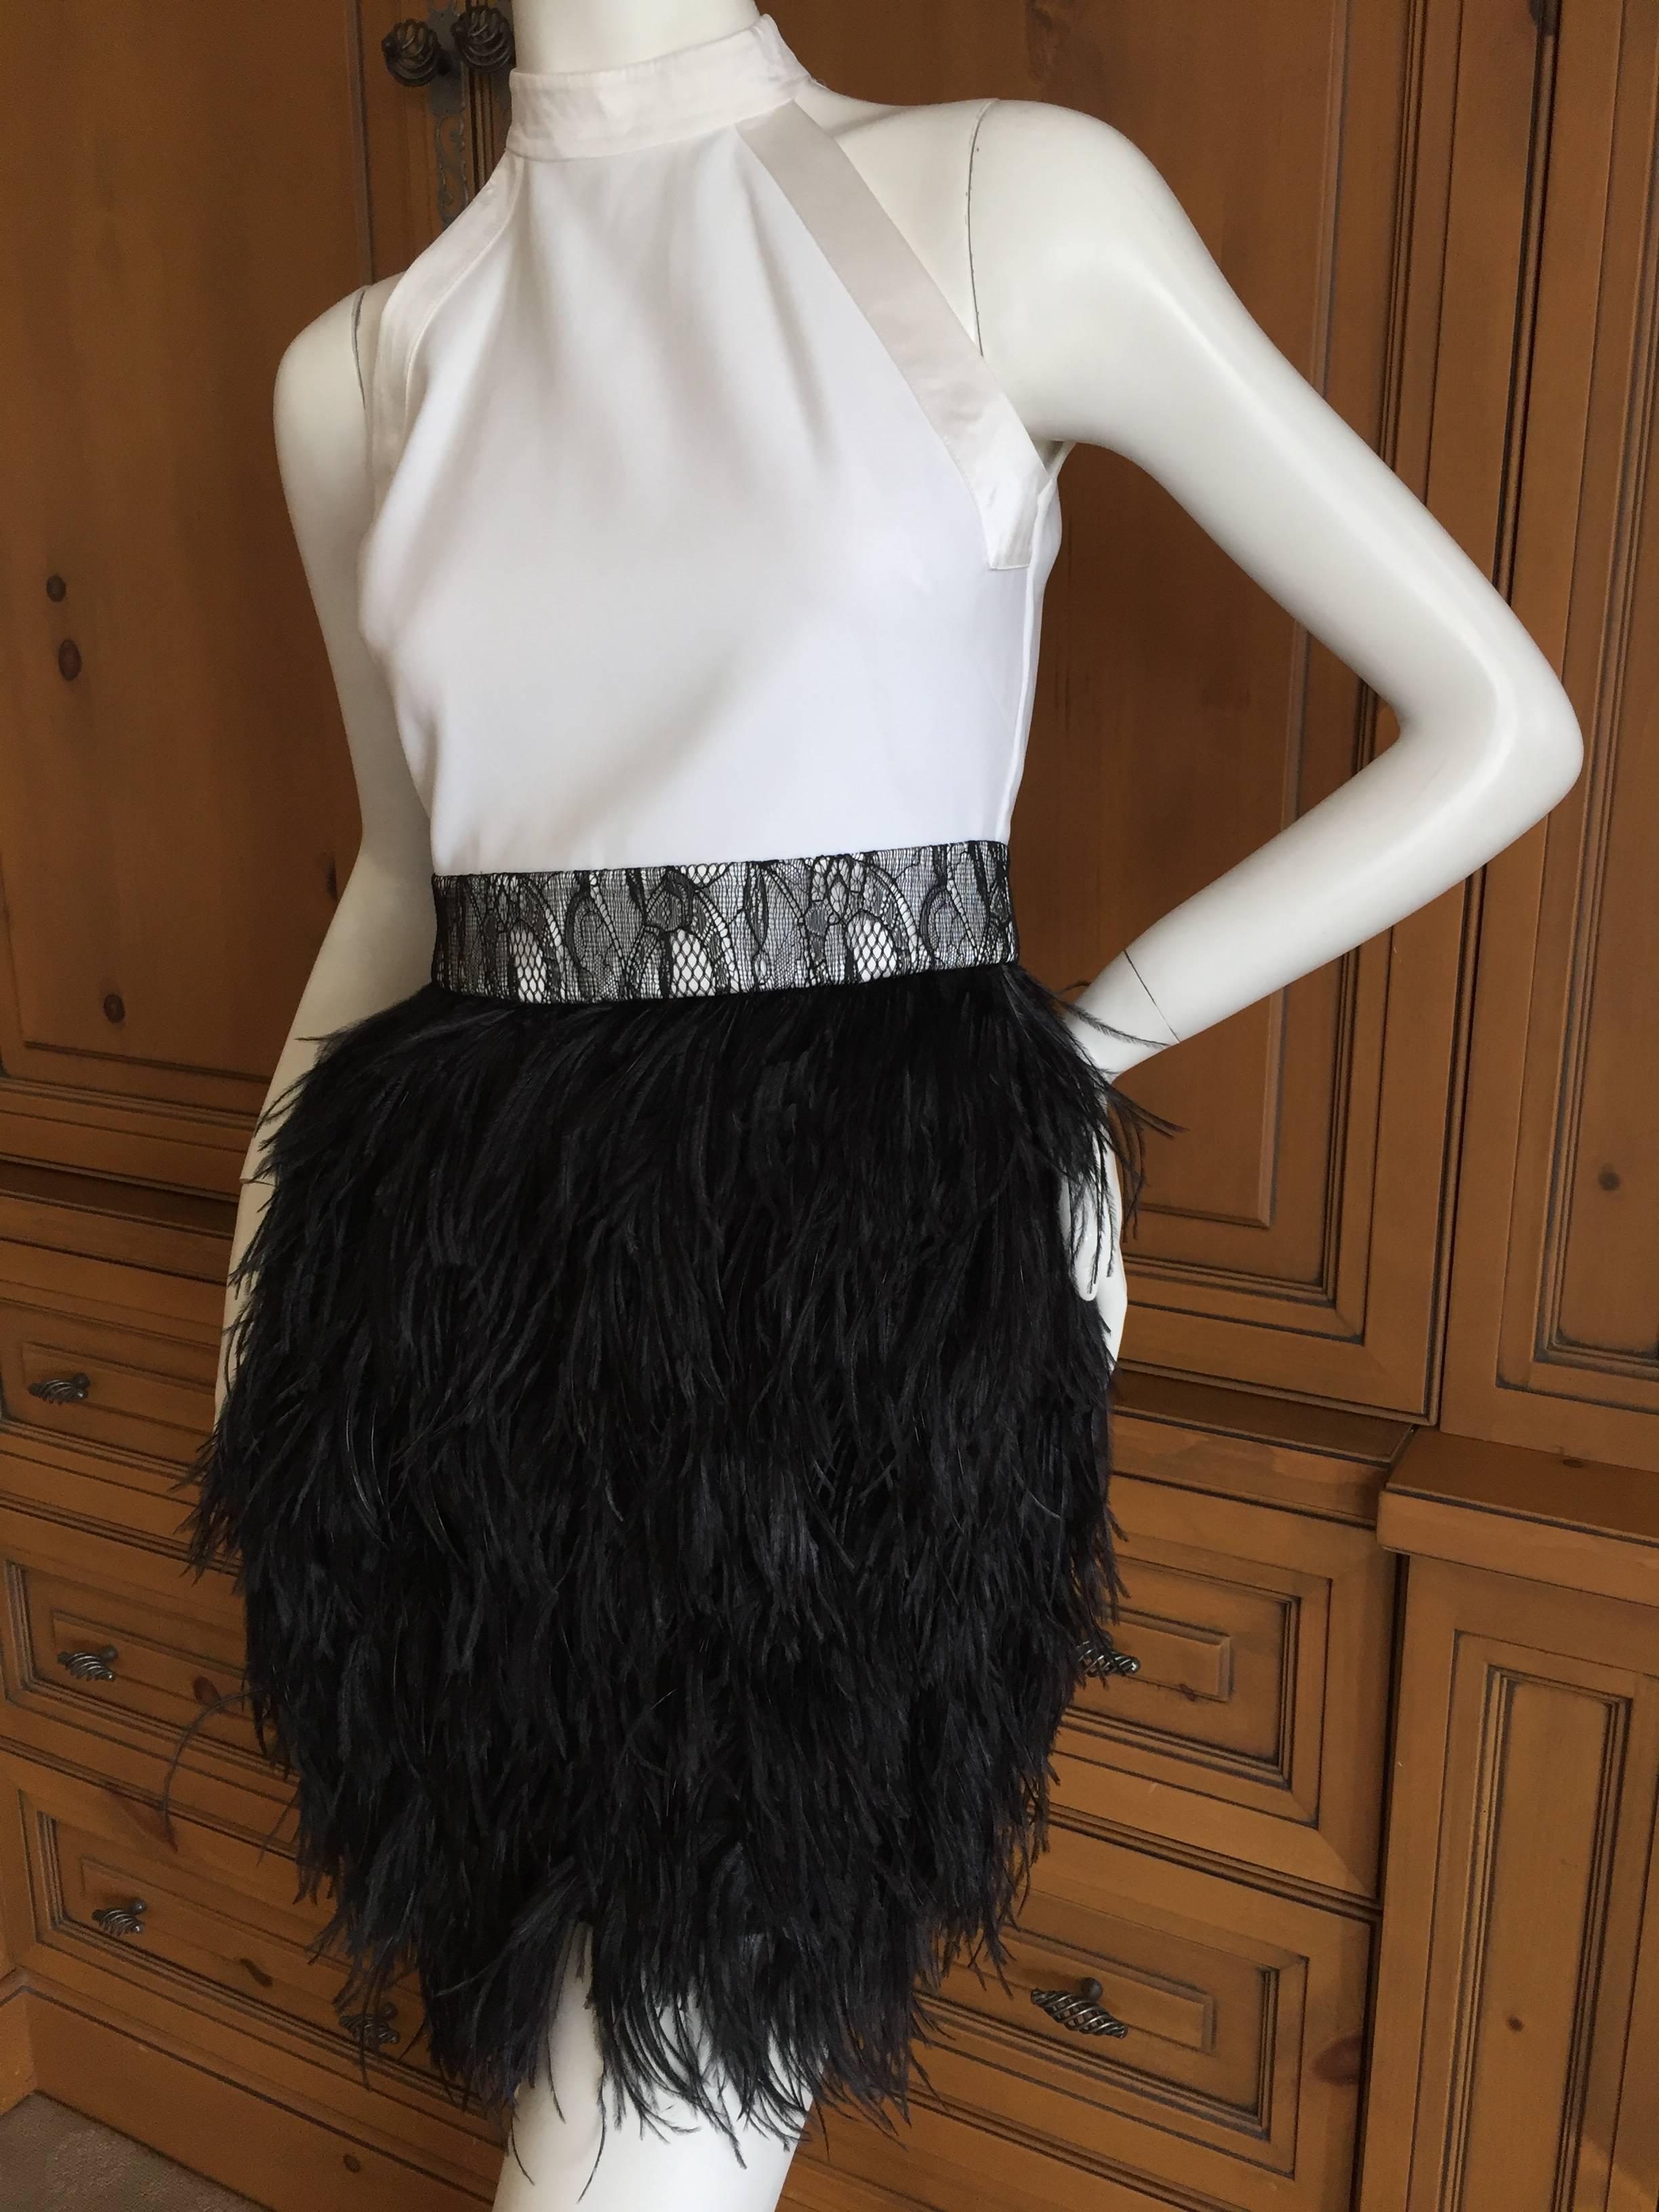 Givenchy by Riccardo Tischi Cocktail Dress with Feather Skirt 2011 In Excellent Condition For Sale In Cloverdale, CA